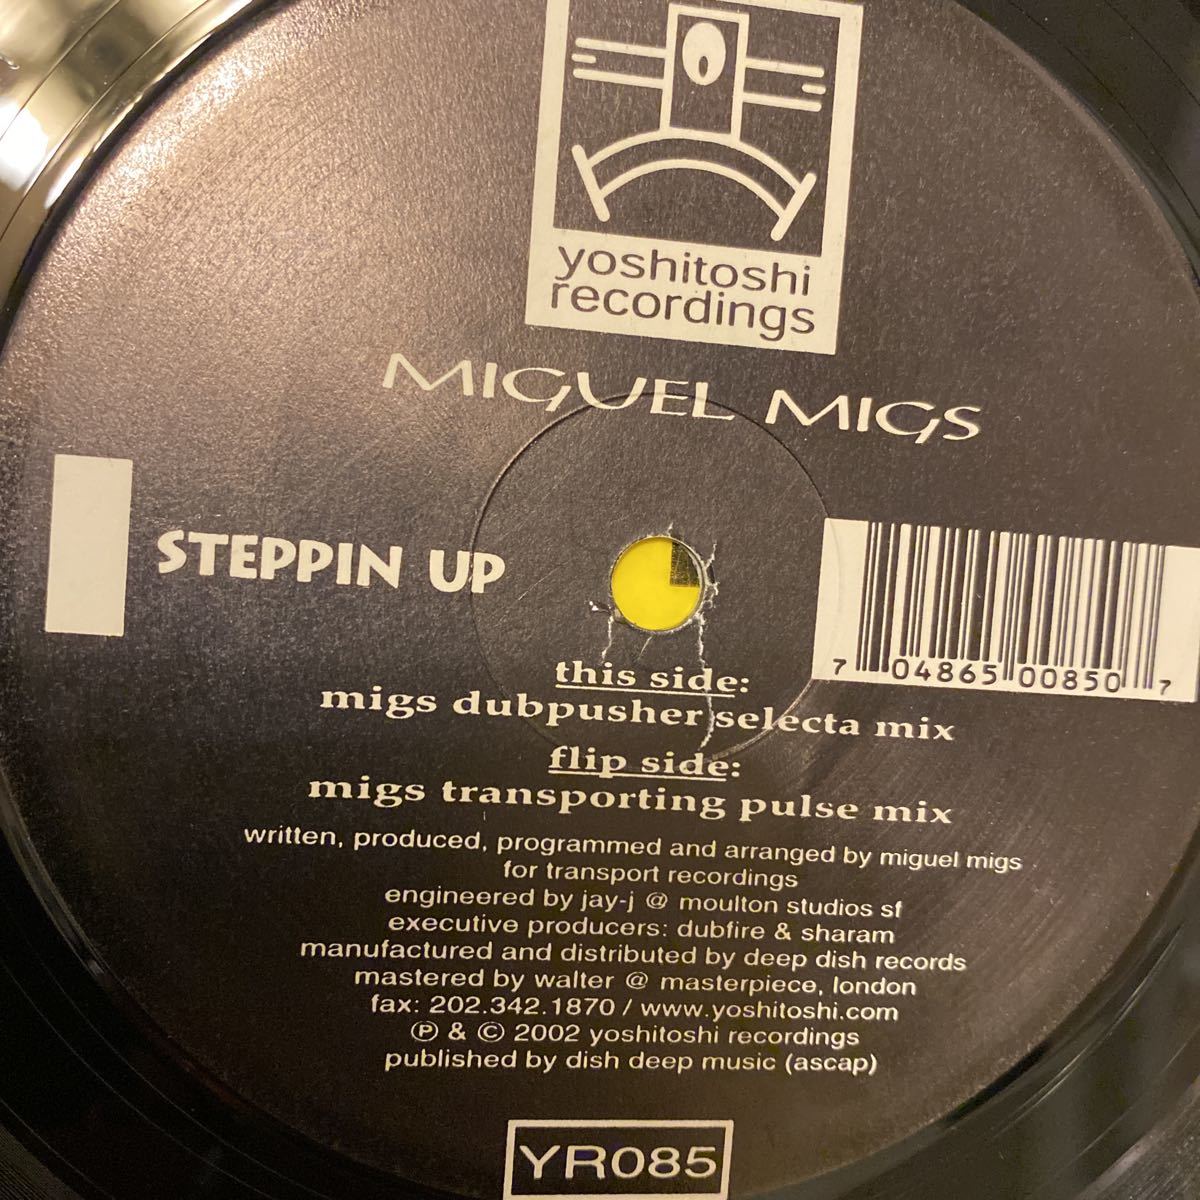 MIGUEL MIGS / STEPPIN UP レコード HOUSE yoshitoshi recordings 2002の画像3